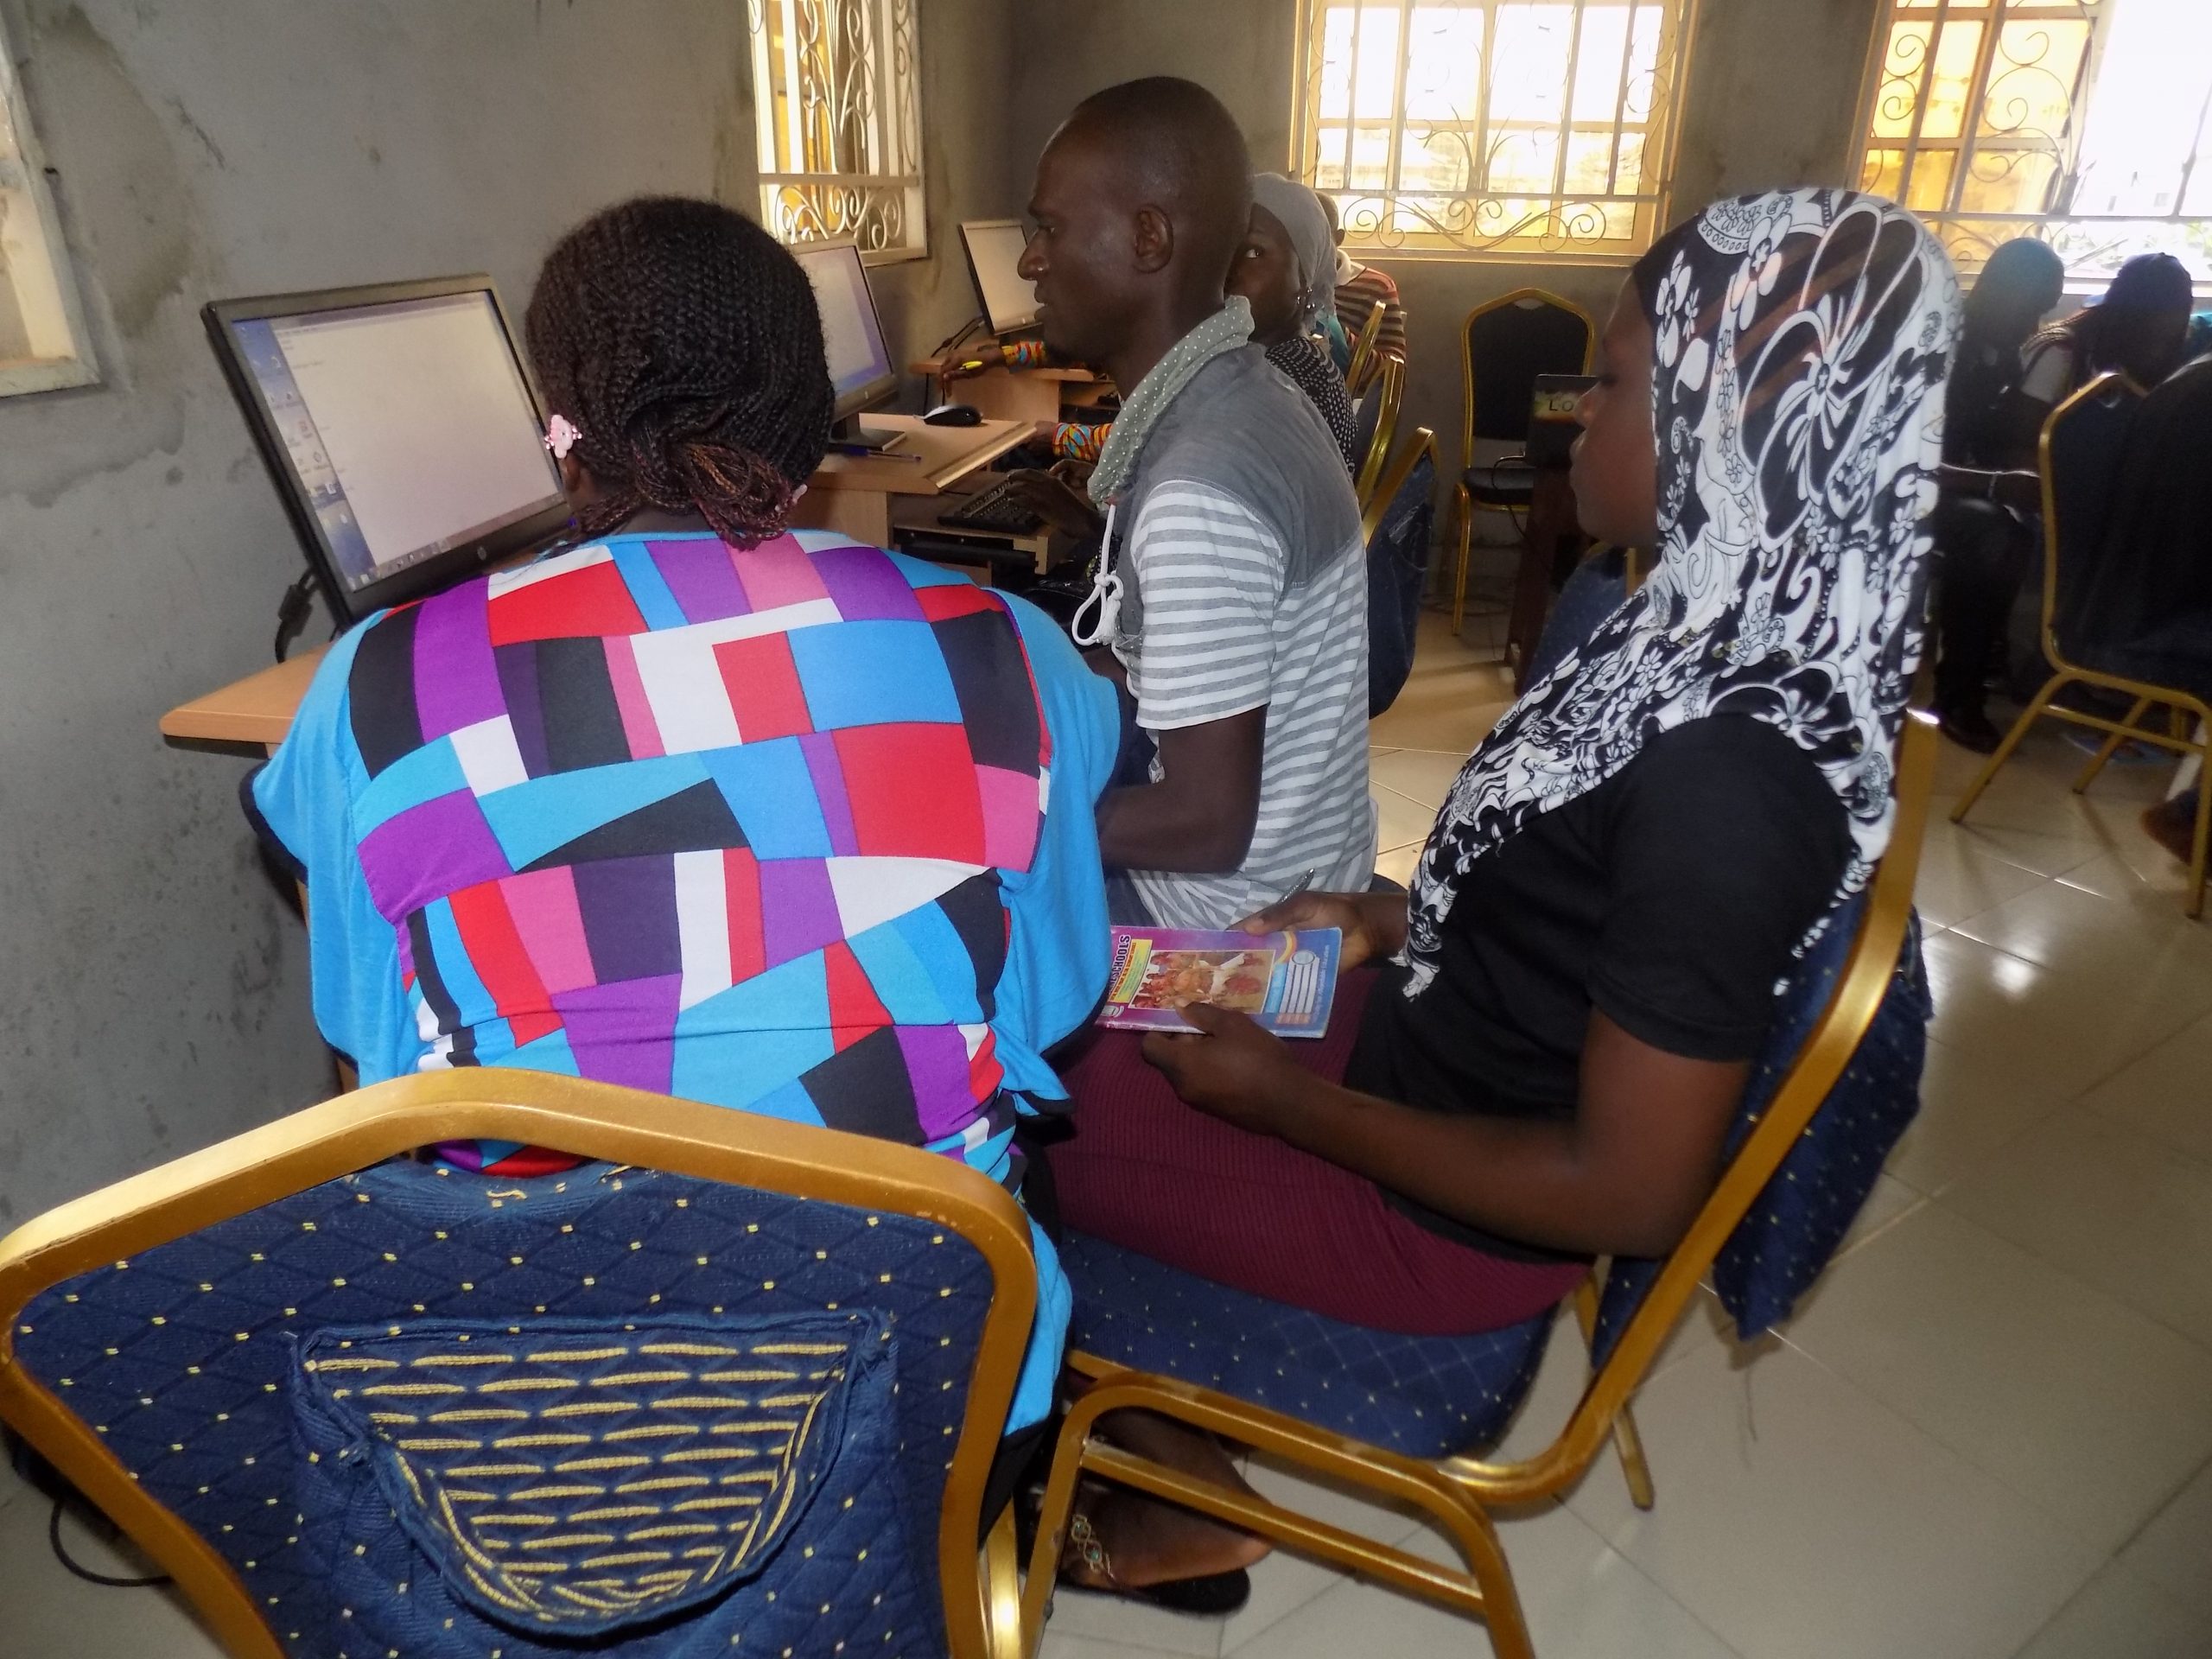 FREE ICT TRAINING FOR MOSLEM WOMEN: AUGUST 11th 2016